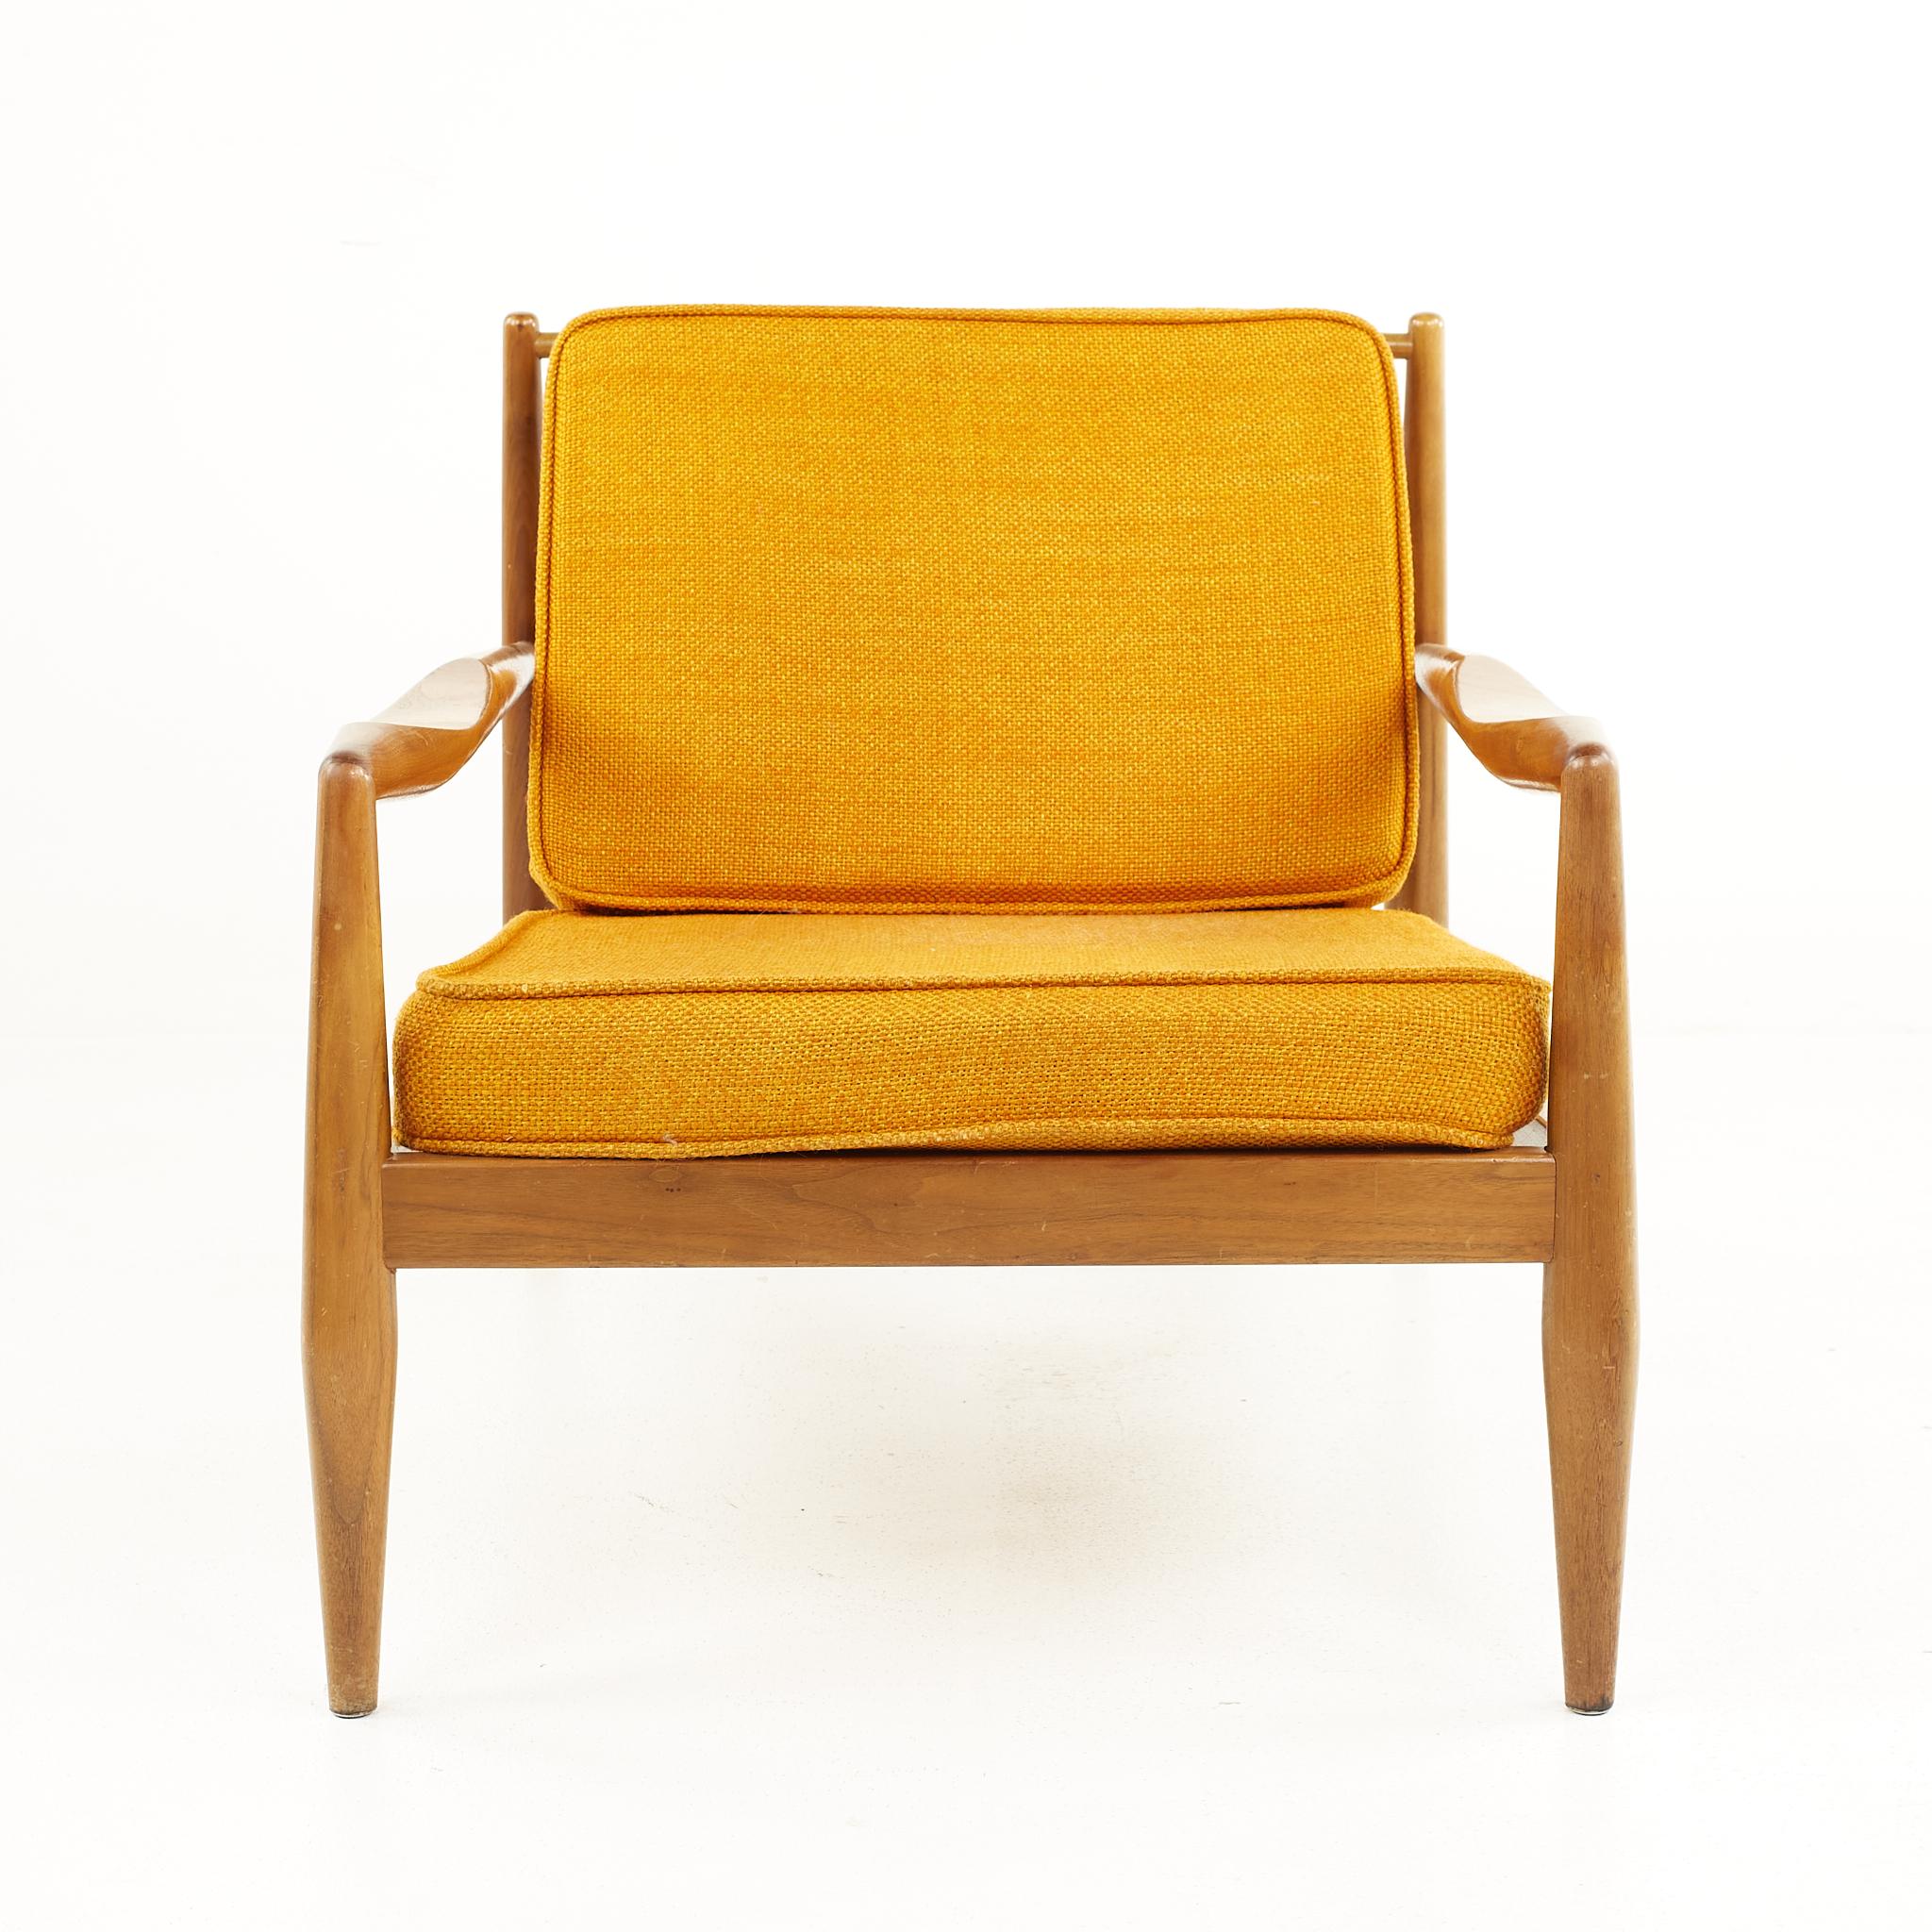 Adrian Pearsall for Craft Associates mid century spindle back lounge chair 

The chair measures: 27.25 wide x 35.5 deep x 27 high, with a seat height of 11.5 inches and arm height/chair clearance of 19.5 inches

All pieces of furniture can be